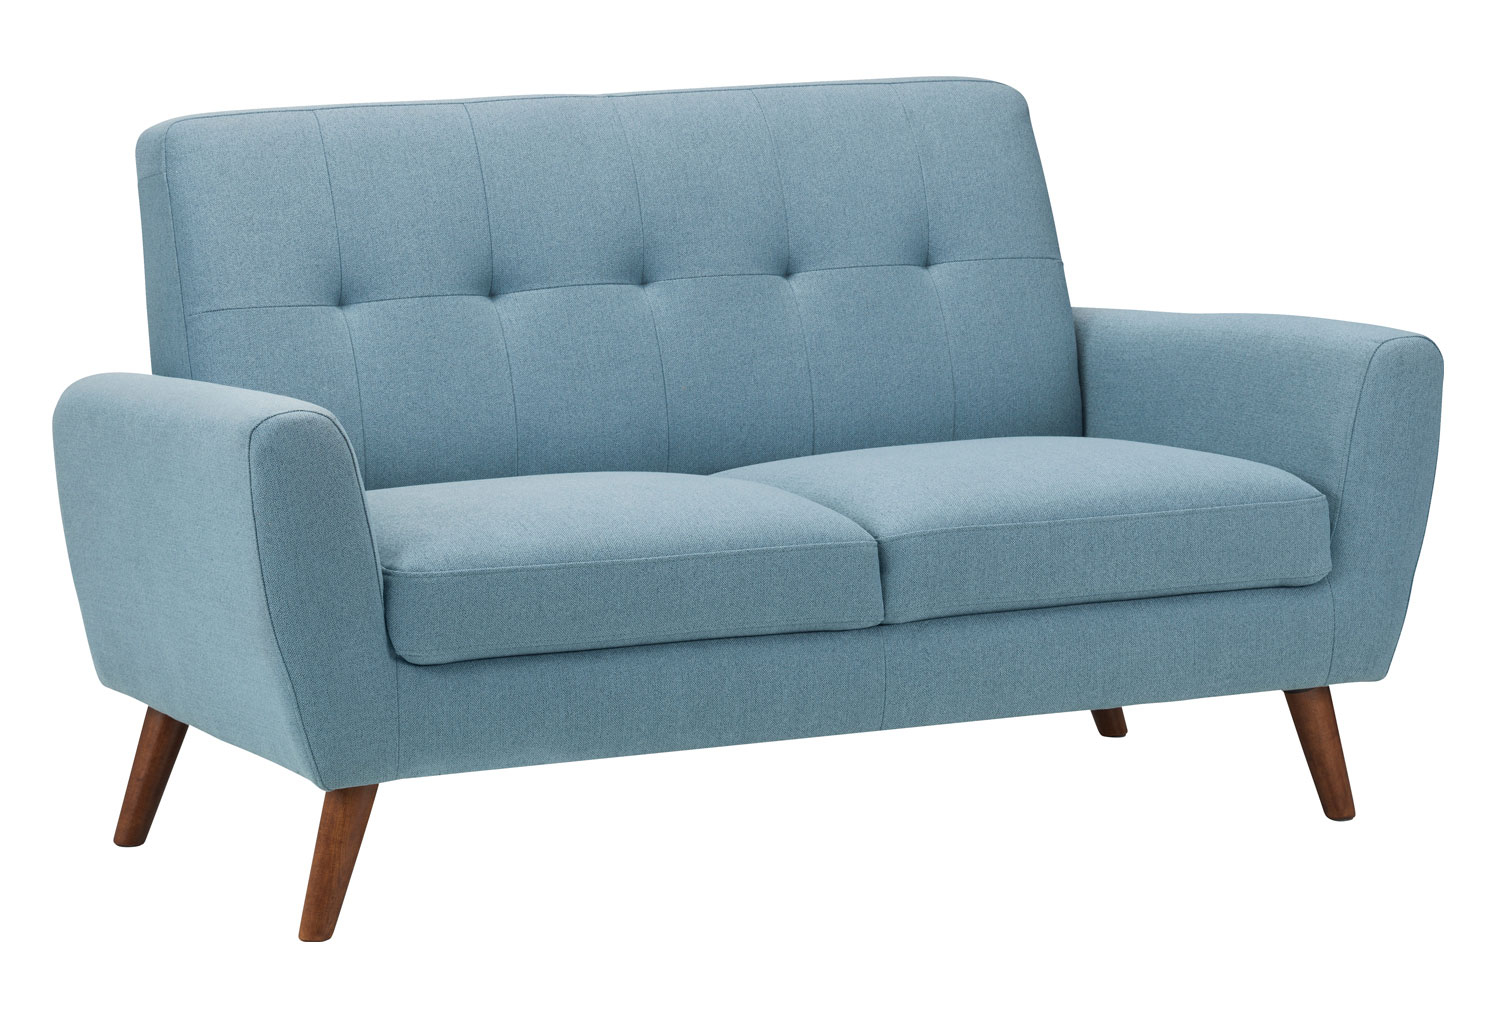 Connelly 2 Seater Sofa, Blue Linen